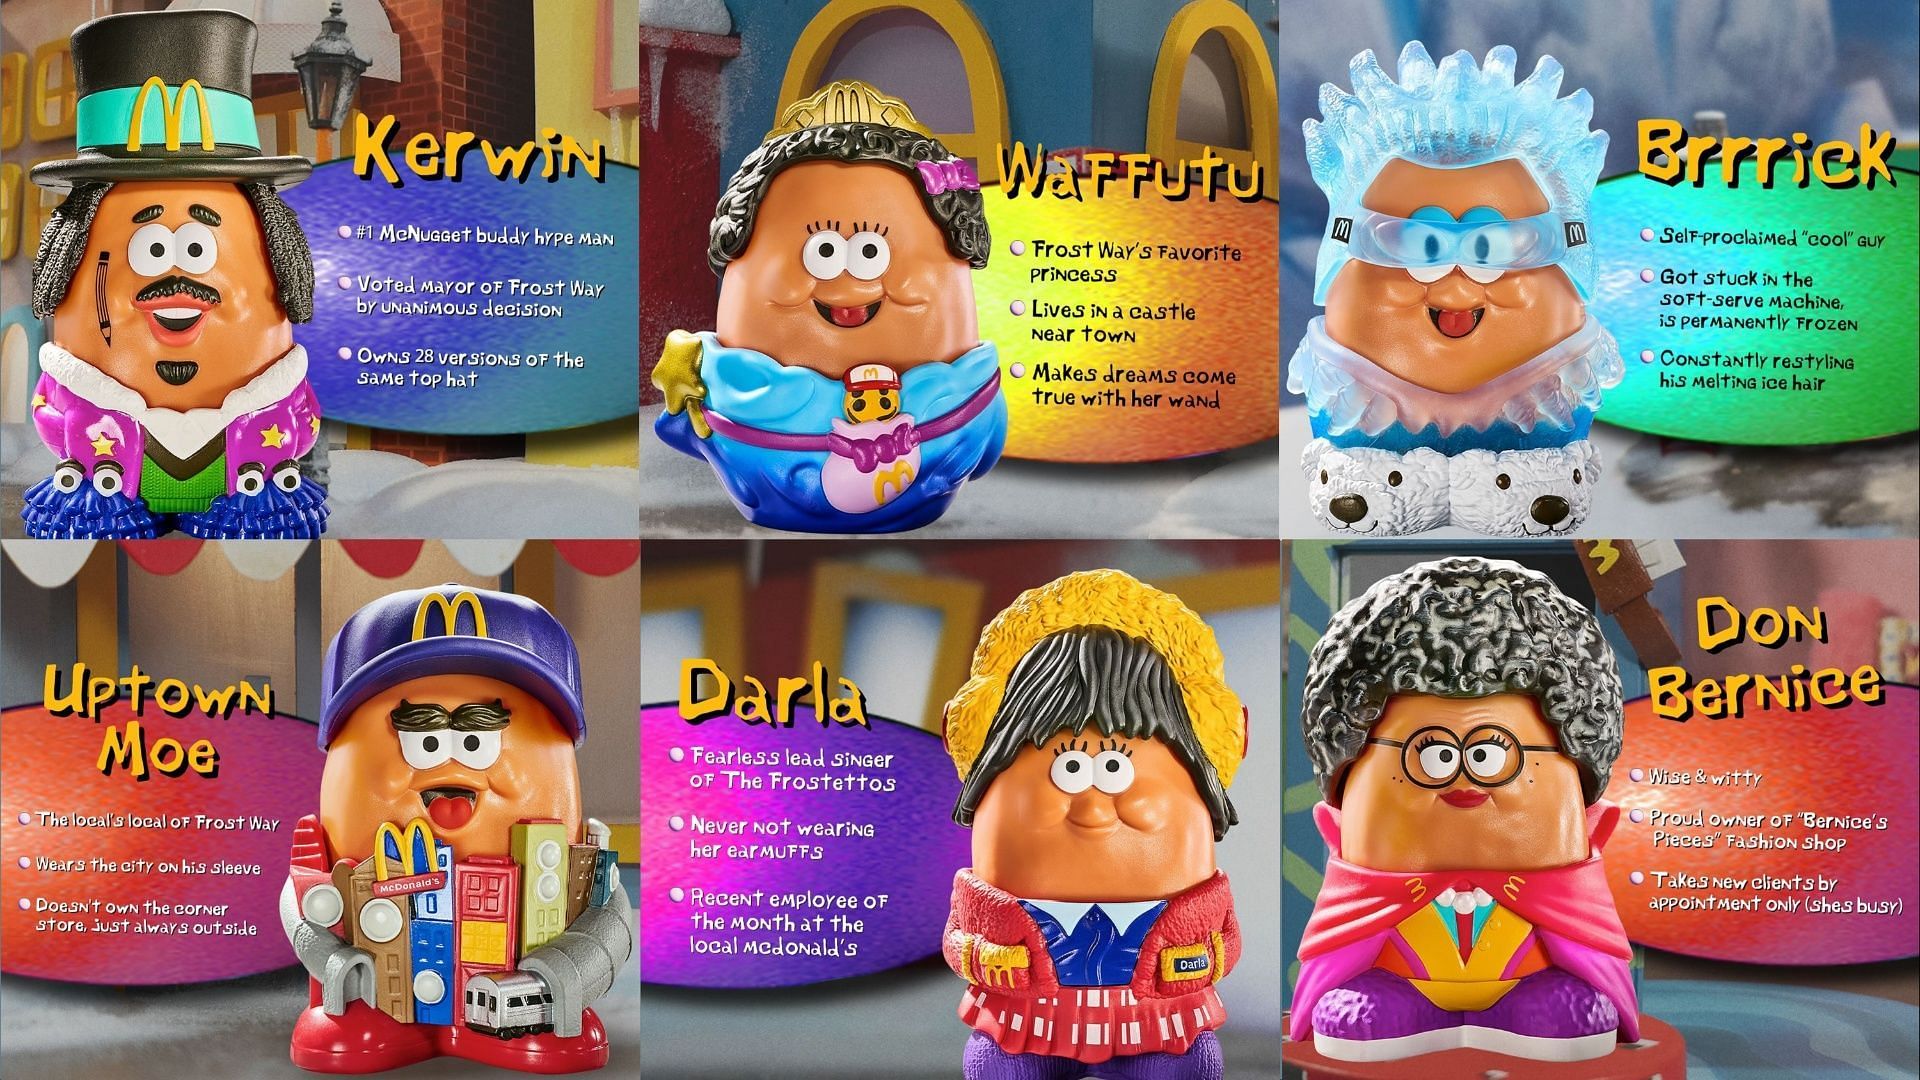 The upcoming Kerwin Frost Meals come with six McNuggets Buddy Collectibles (Image via @mcnuggetbudds on Instagram)